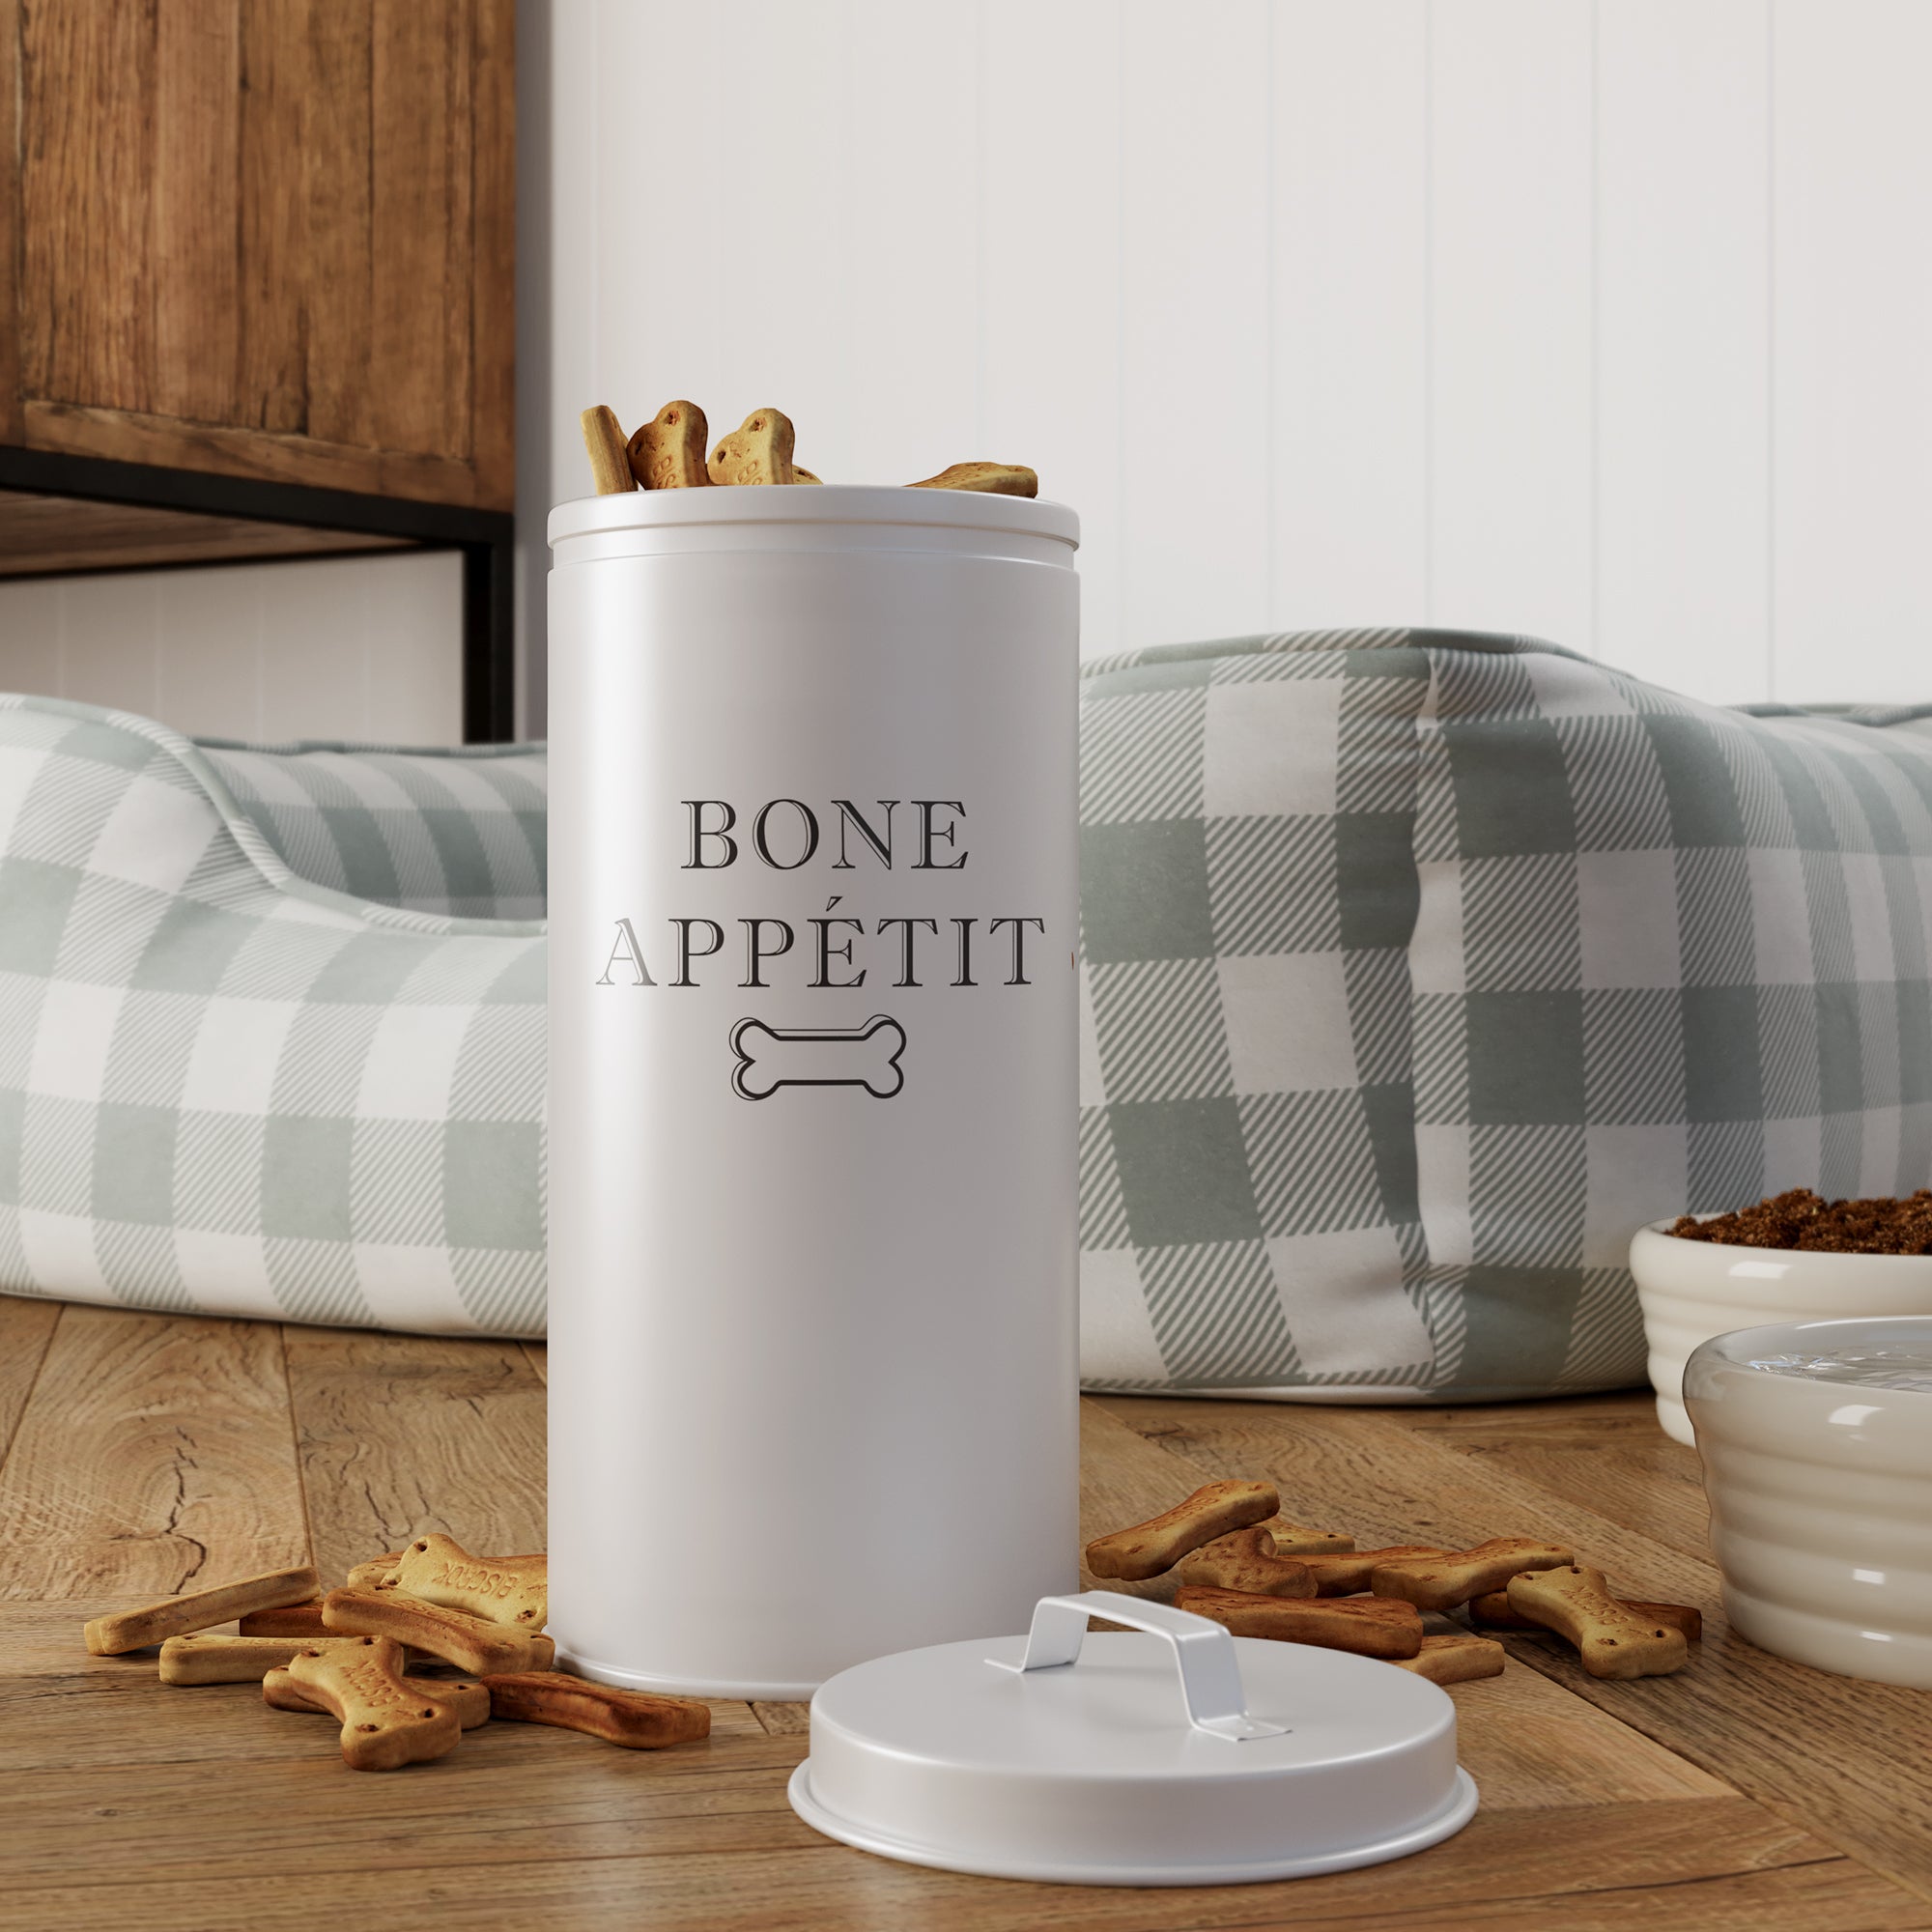 ceramic flour storage containers large - Google Search  Dog food storage  containers, Pet food storage, Dog food container